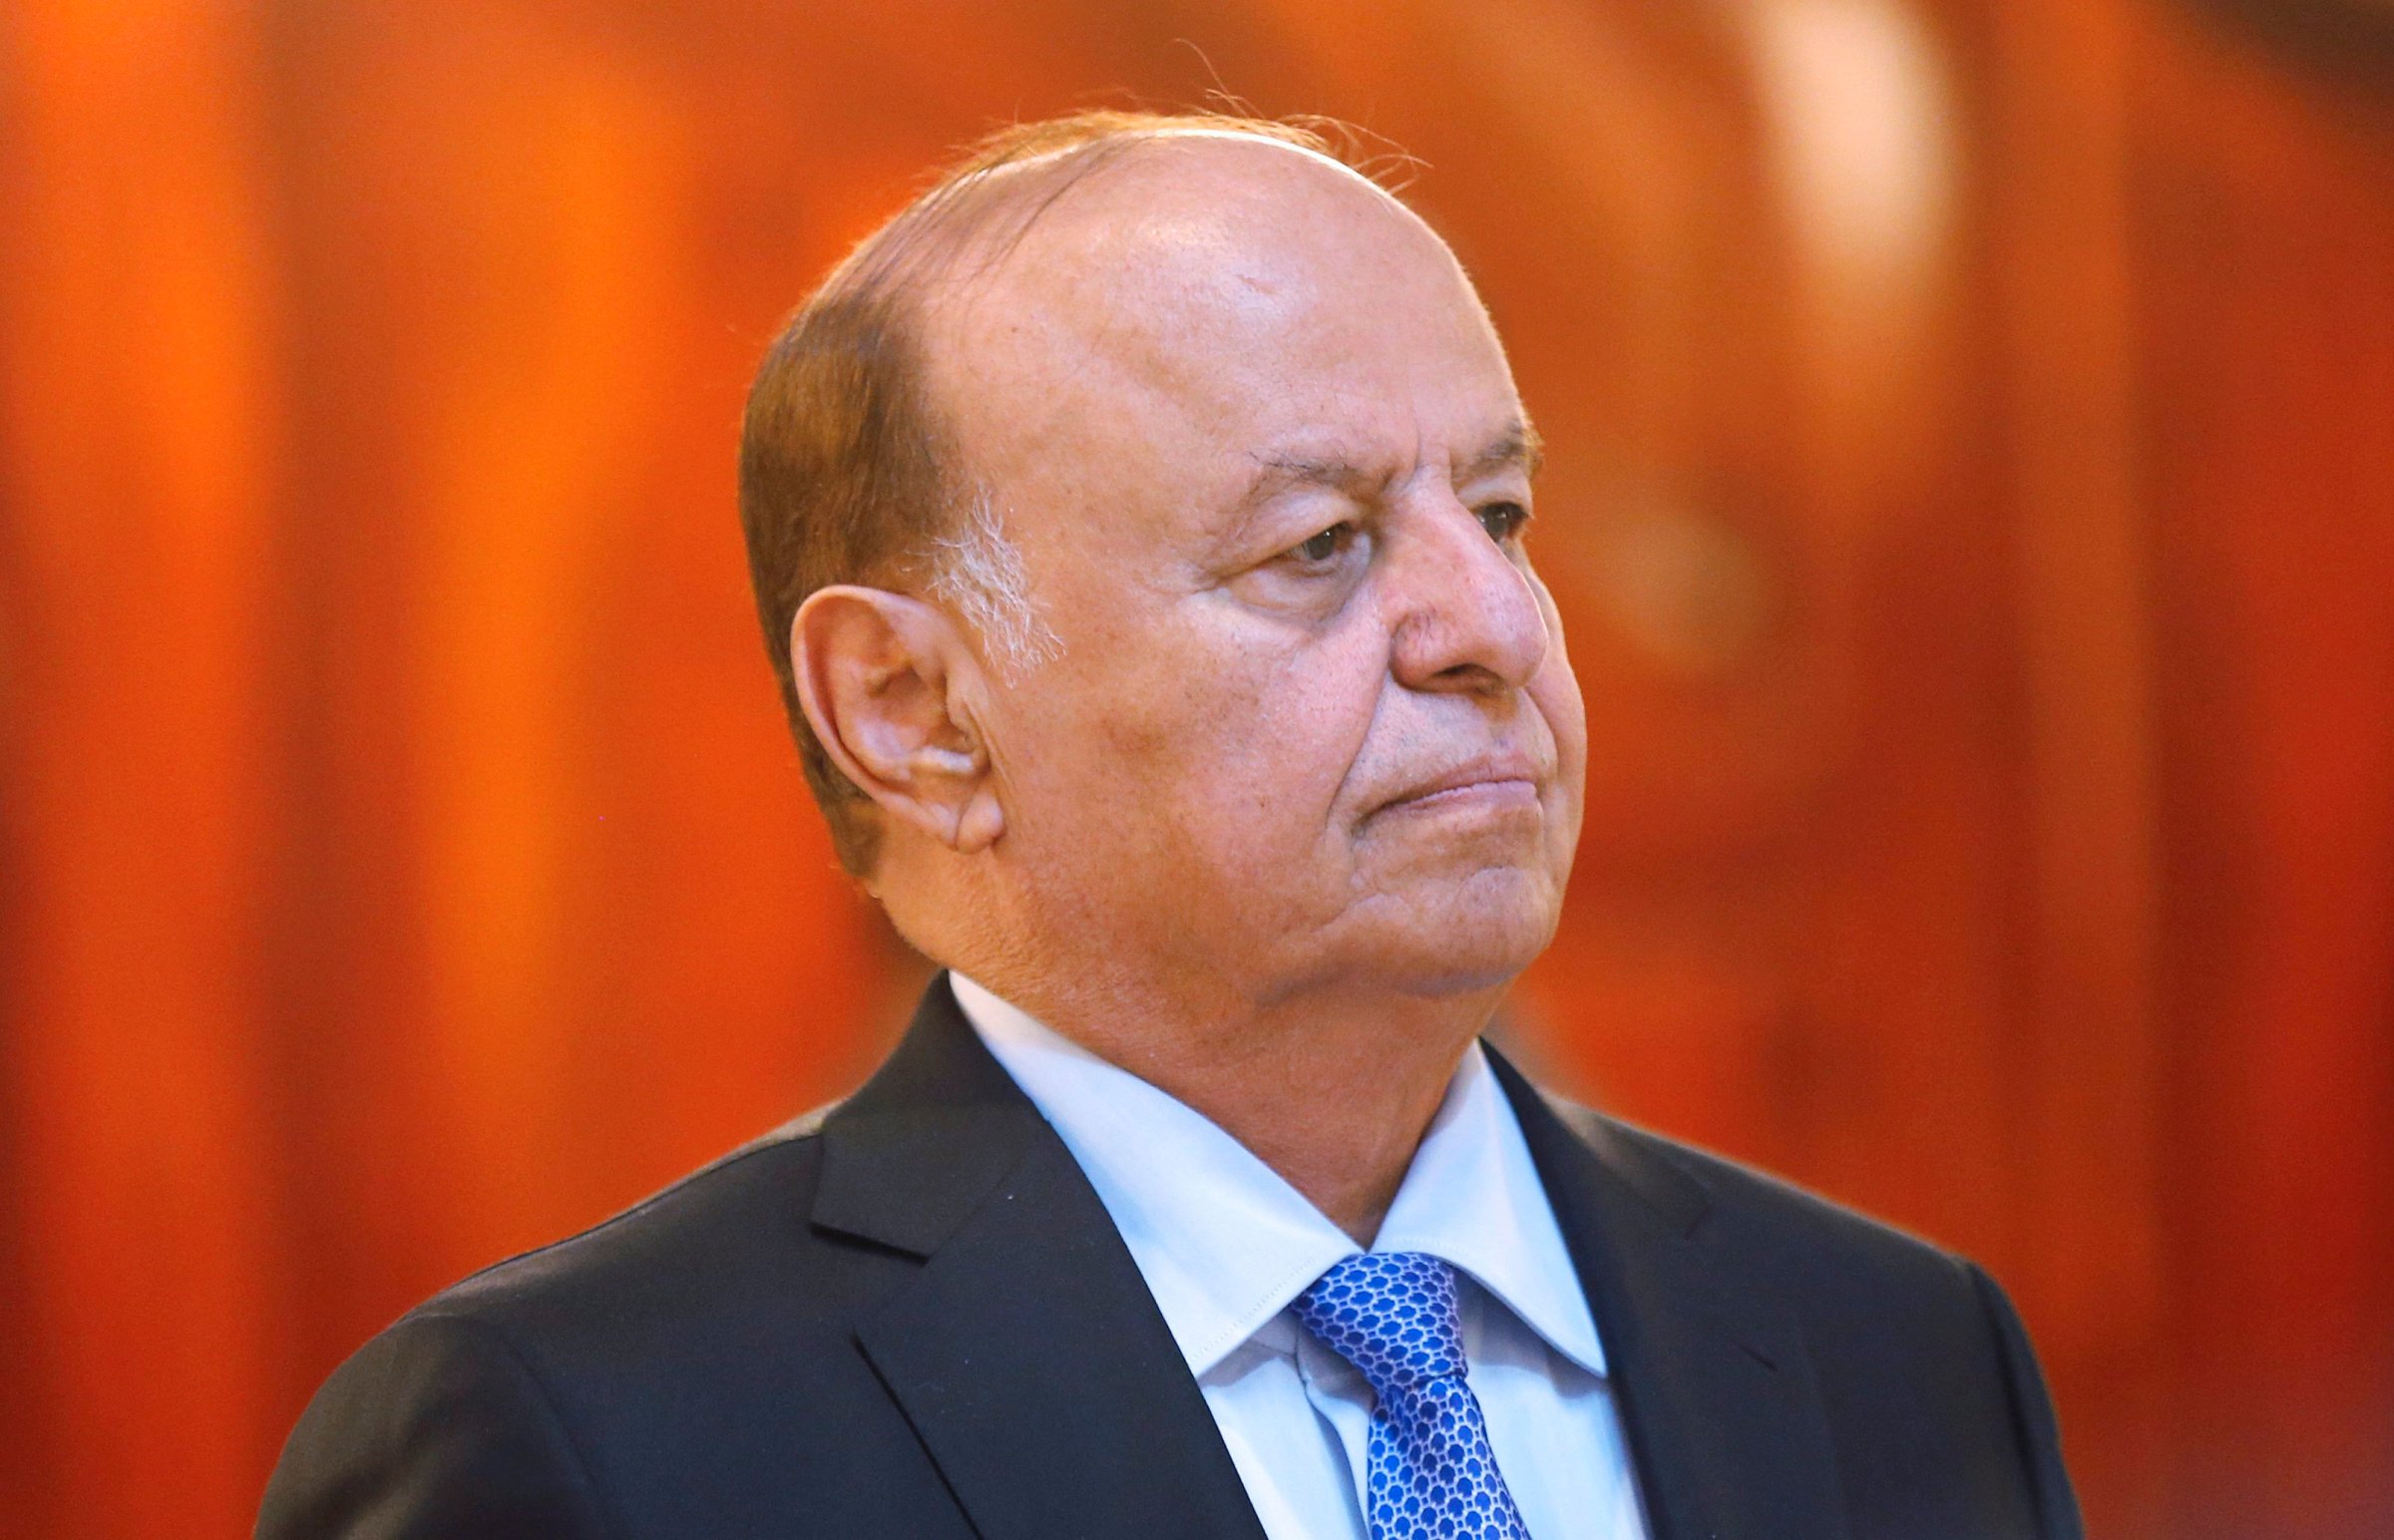 File photo of Yemen's President Hadi stands attending a reception during the holy fasting month of Ramadan at the Republican Palace in Sanaa